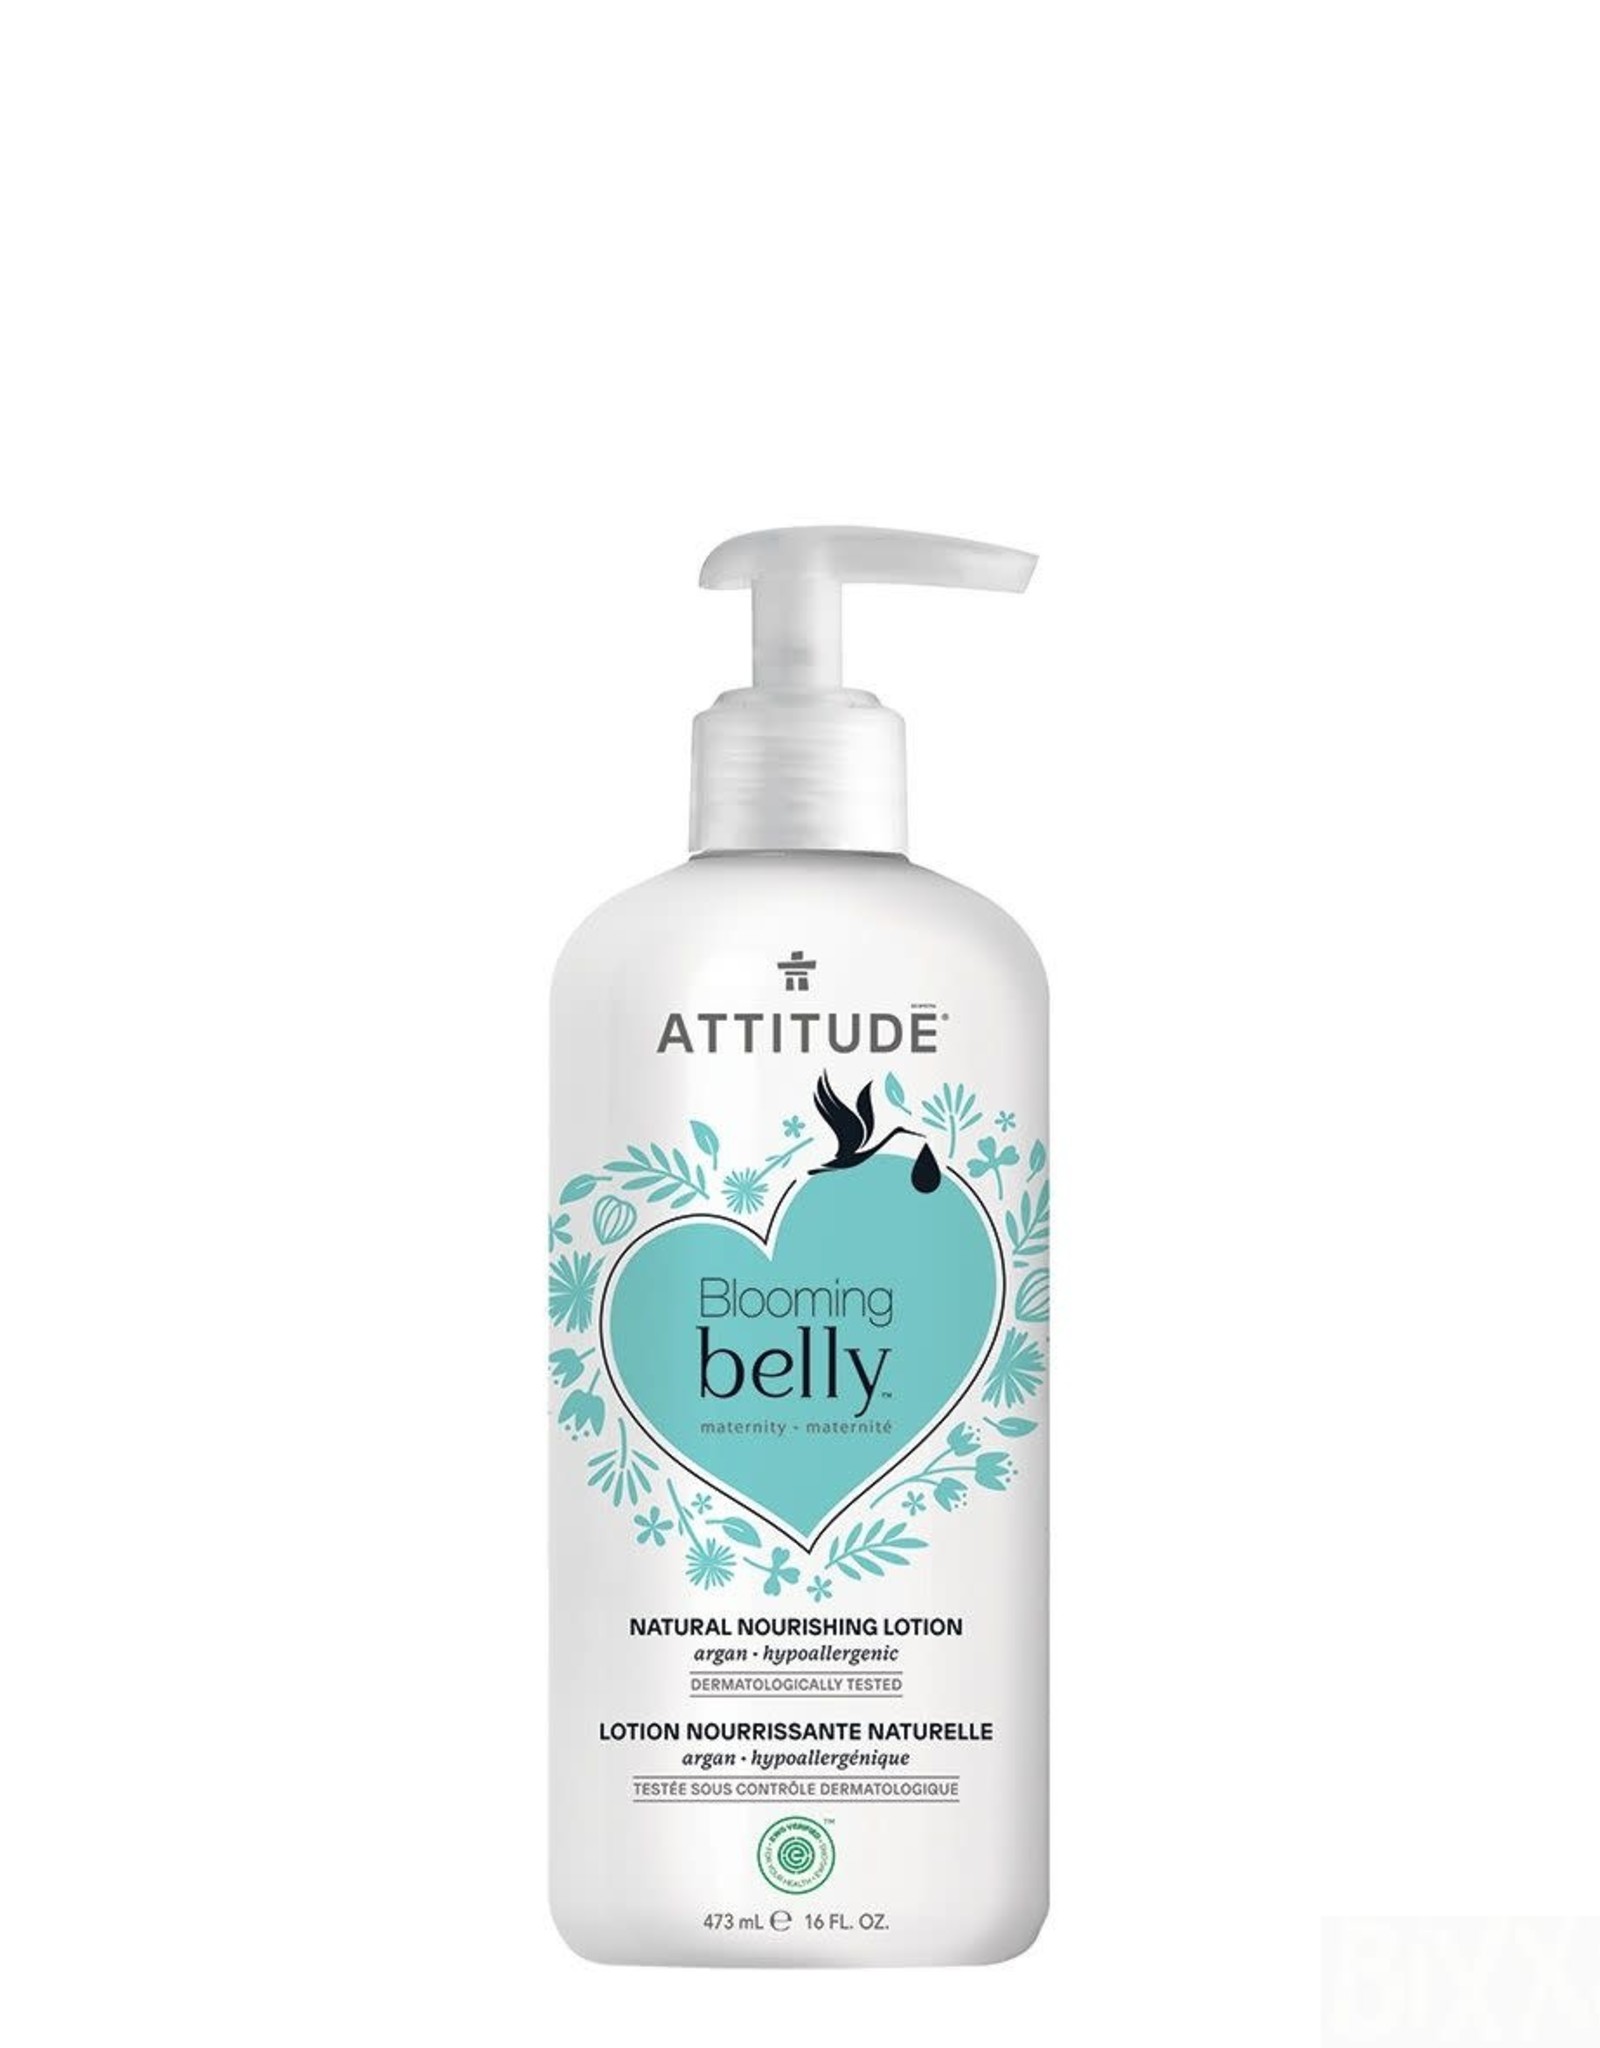 Attitude Blooming Belly Natural Nourishing Lotion 473ml